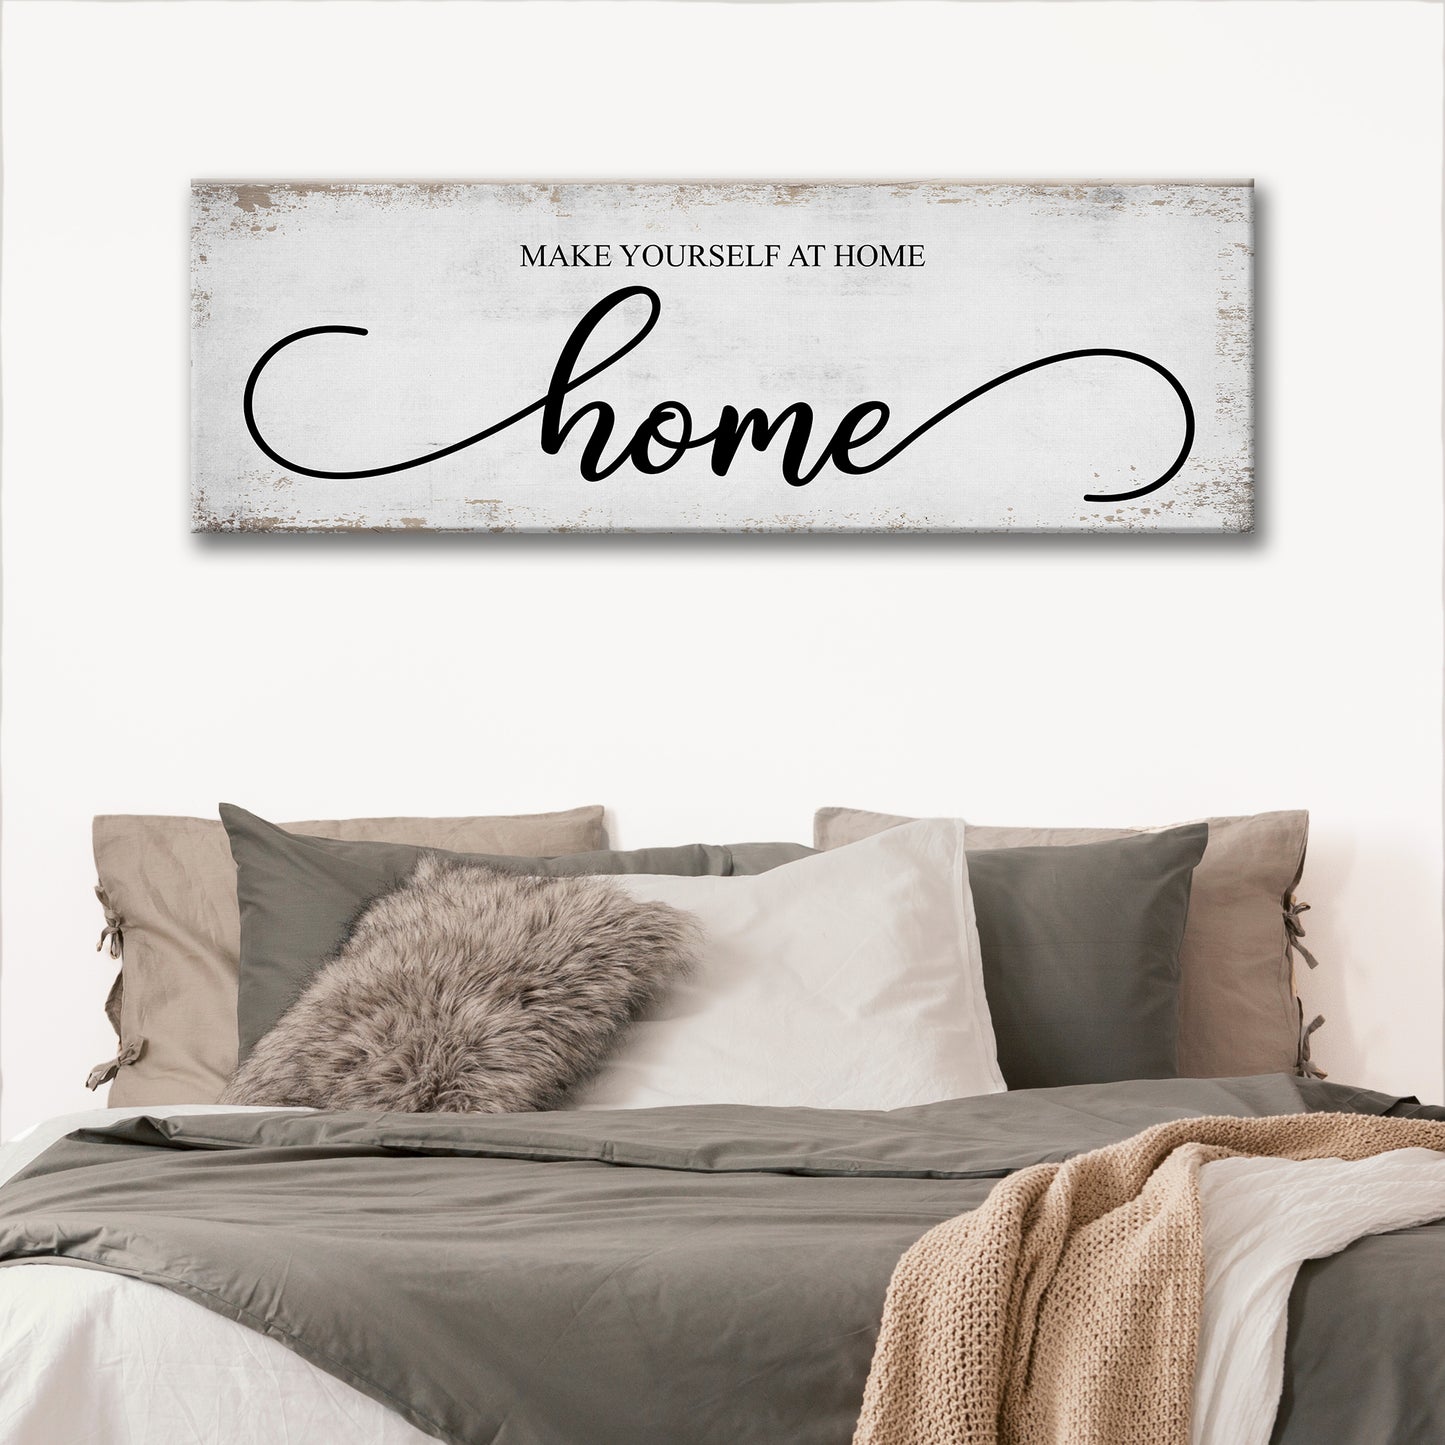 Make Yourself At Home Sign - Image by Tailored Canvases